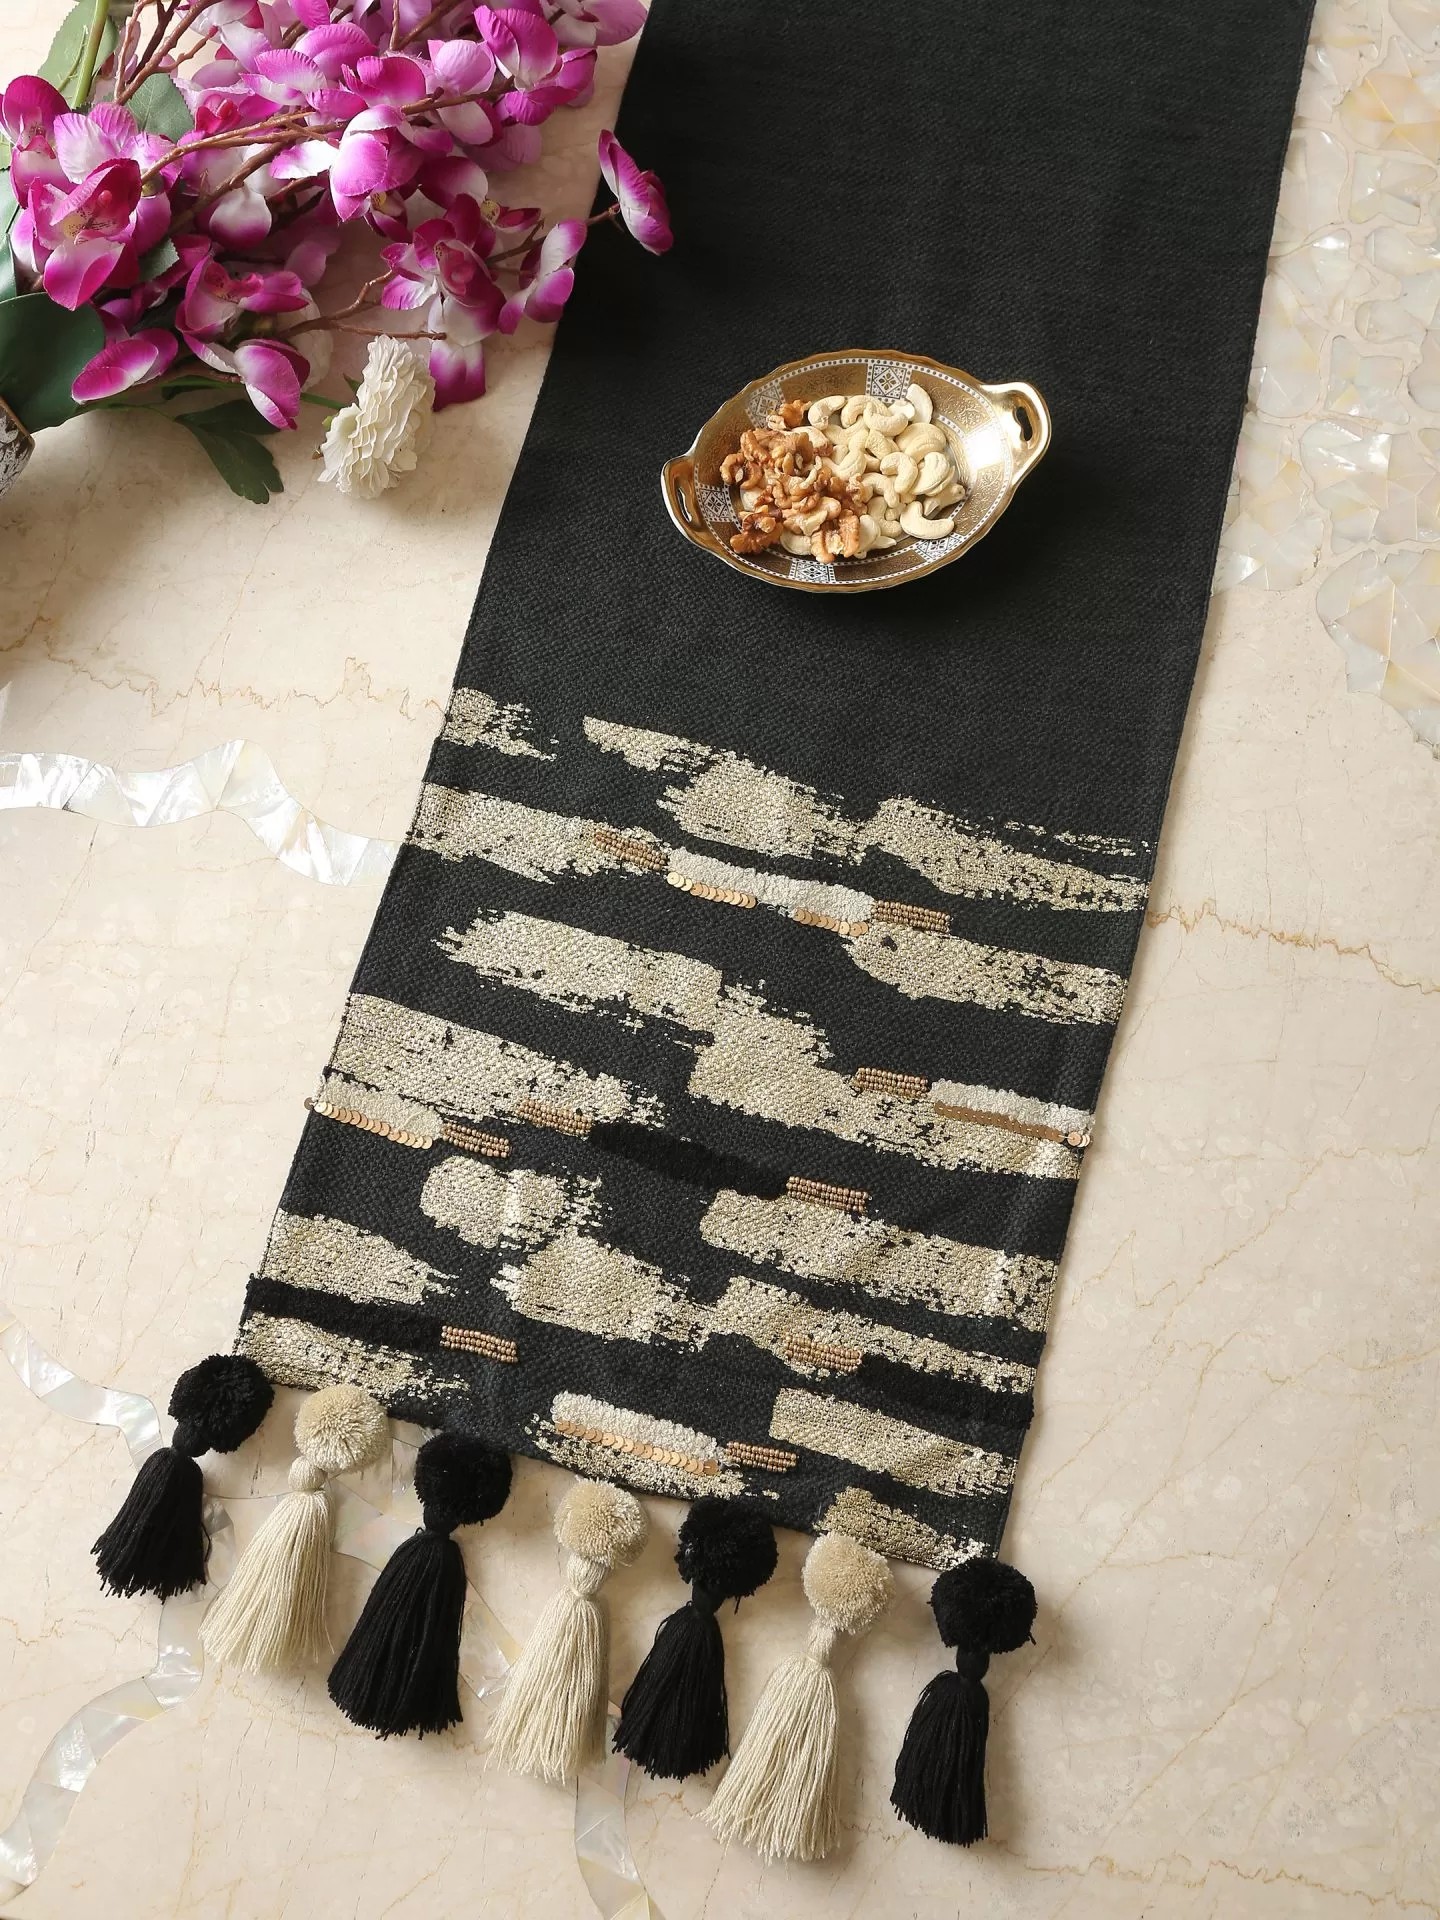 Charcoal black table runner - Amoliconcepts